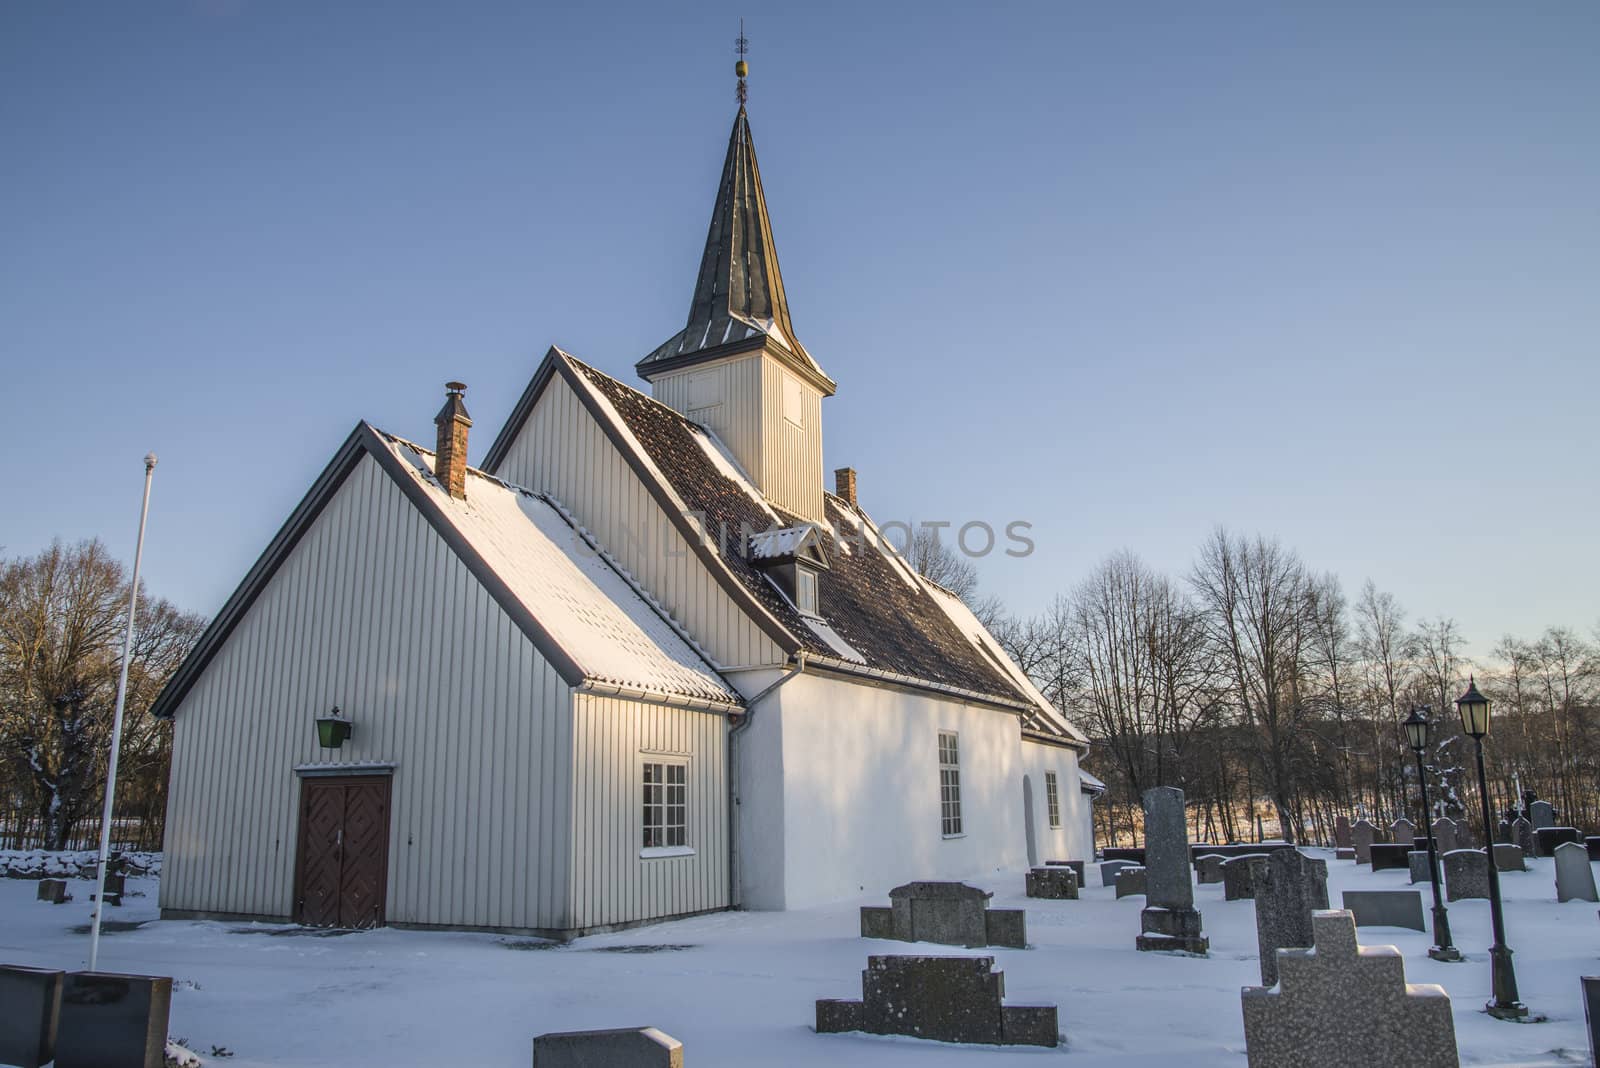 picture is shot in December 2012 and shows Idd church, built around 1100 in halden municipality, Idd church was badly damaged in an earthquake on sunday 23 october 1904, the quake occurred mid under church time, and the church was full of people, panic occured, but no one was injured, it was long a doubt about the church could be saved, but in 1922 it was completely restored